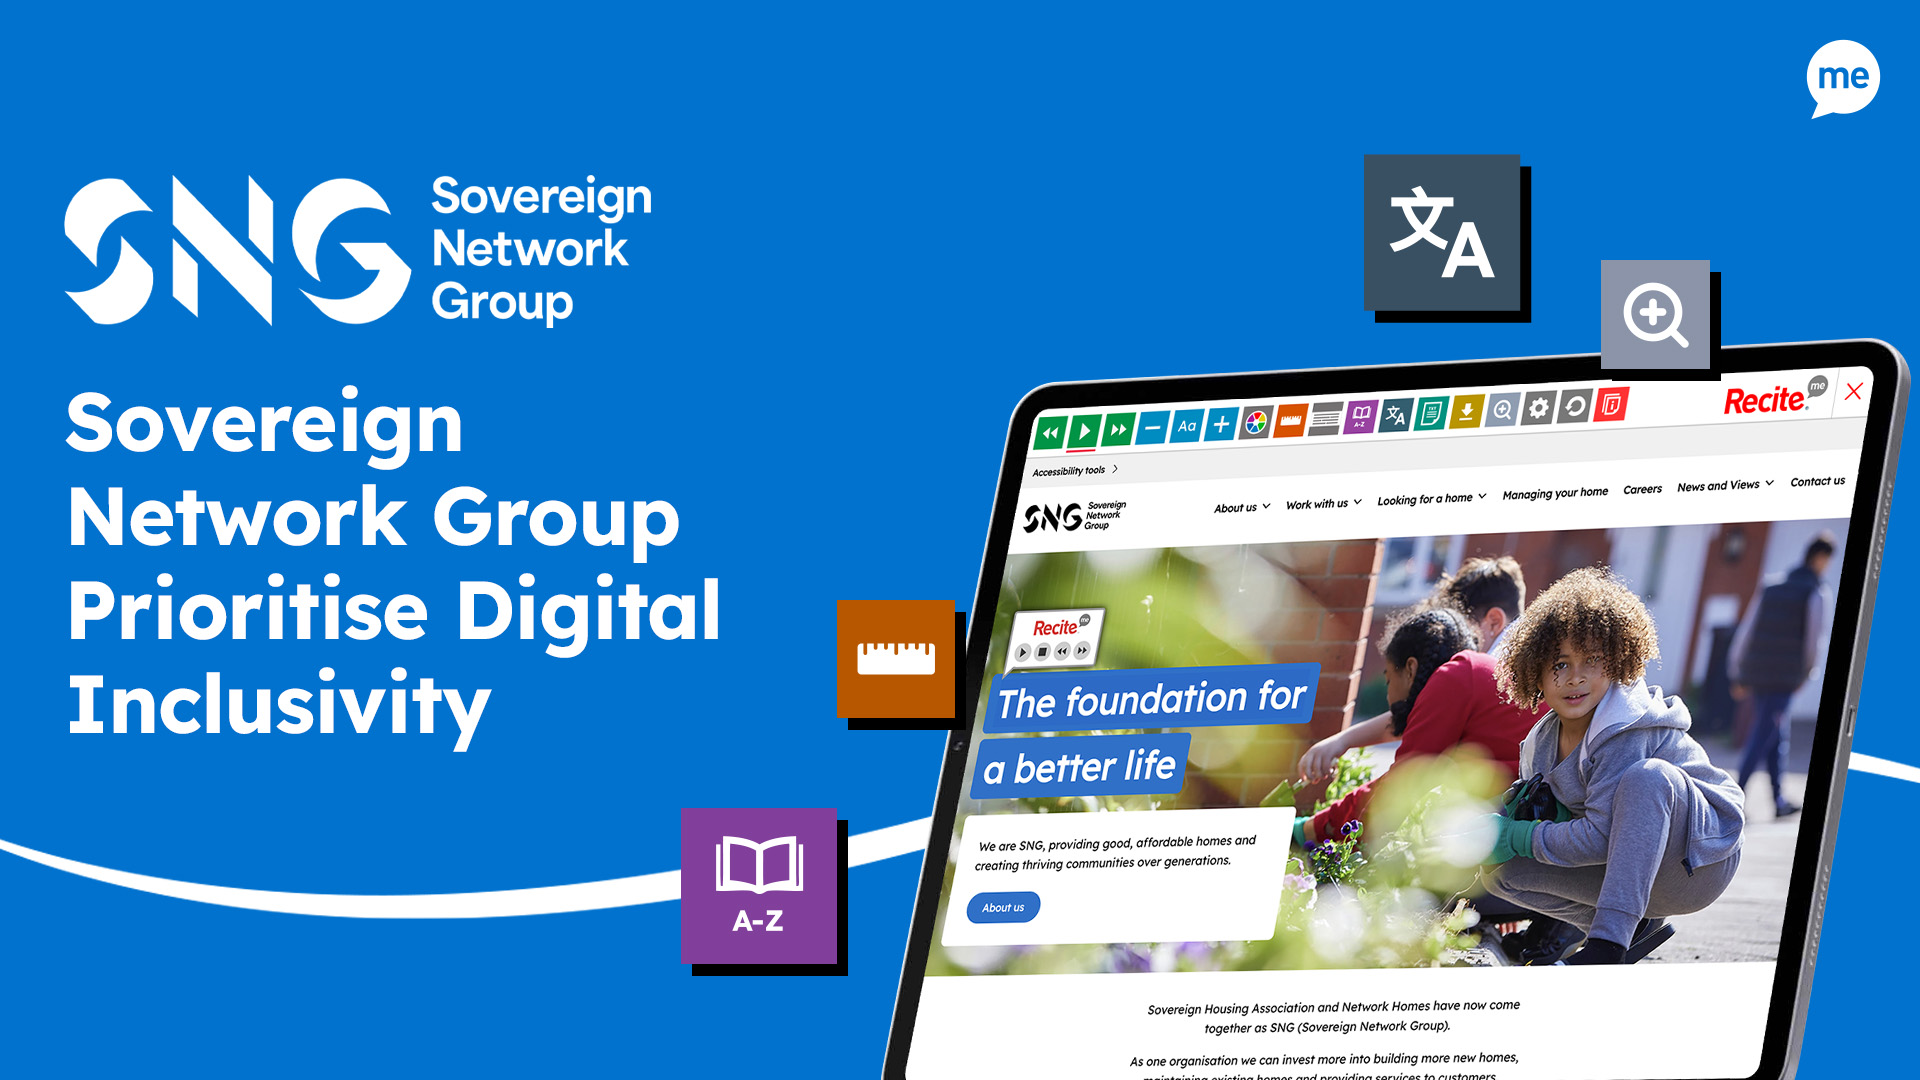 SNG (Sovereign Network Group) Prioritise Digital Inclusivity. Mock-up of the Recite Me toolbar being used on the SNG website.